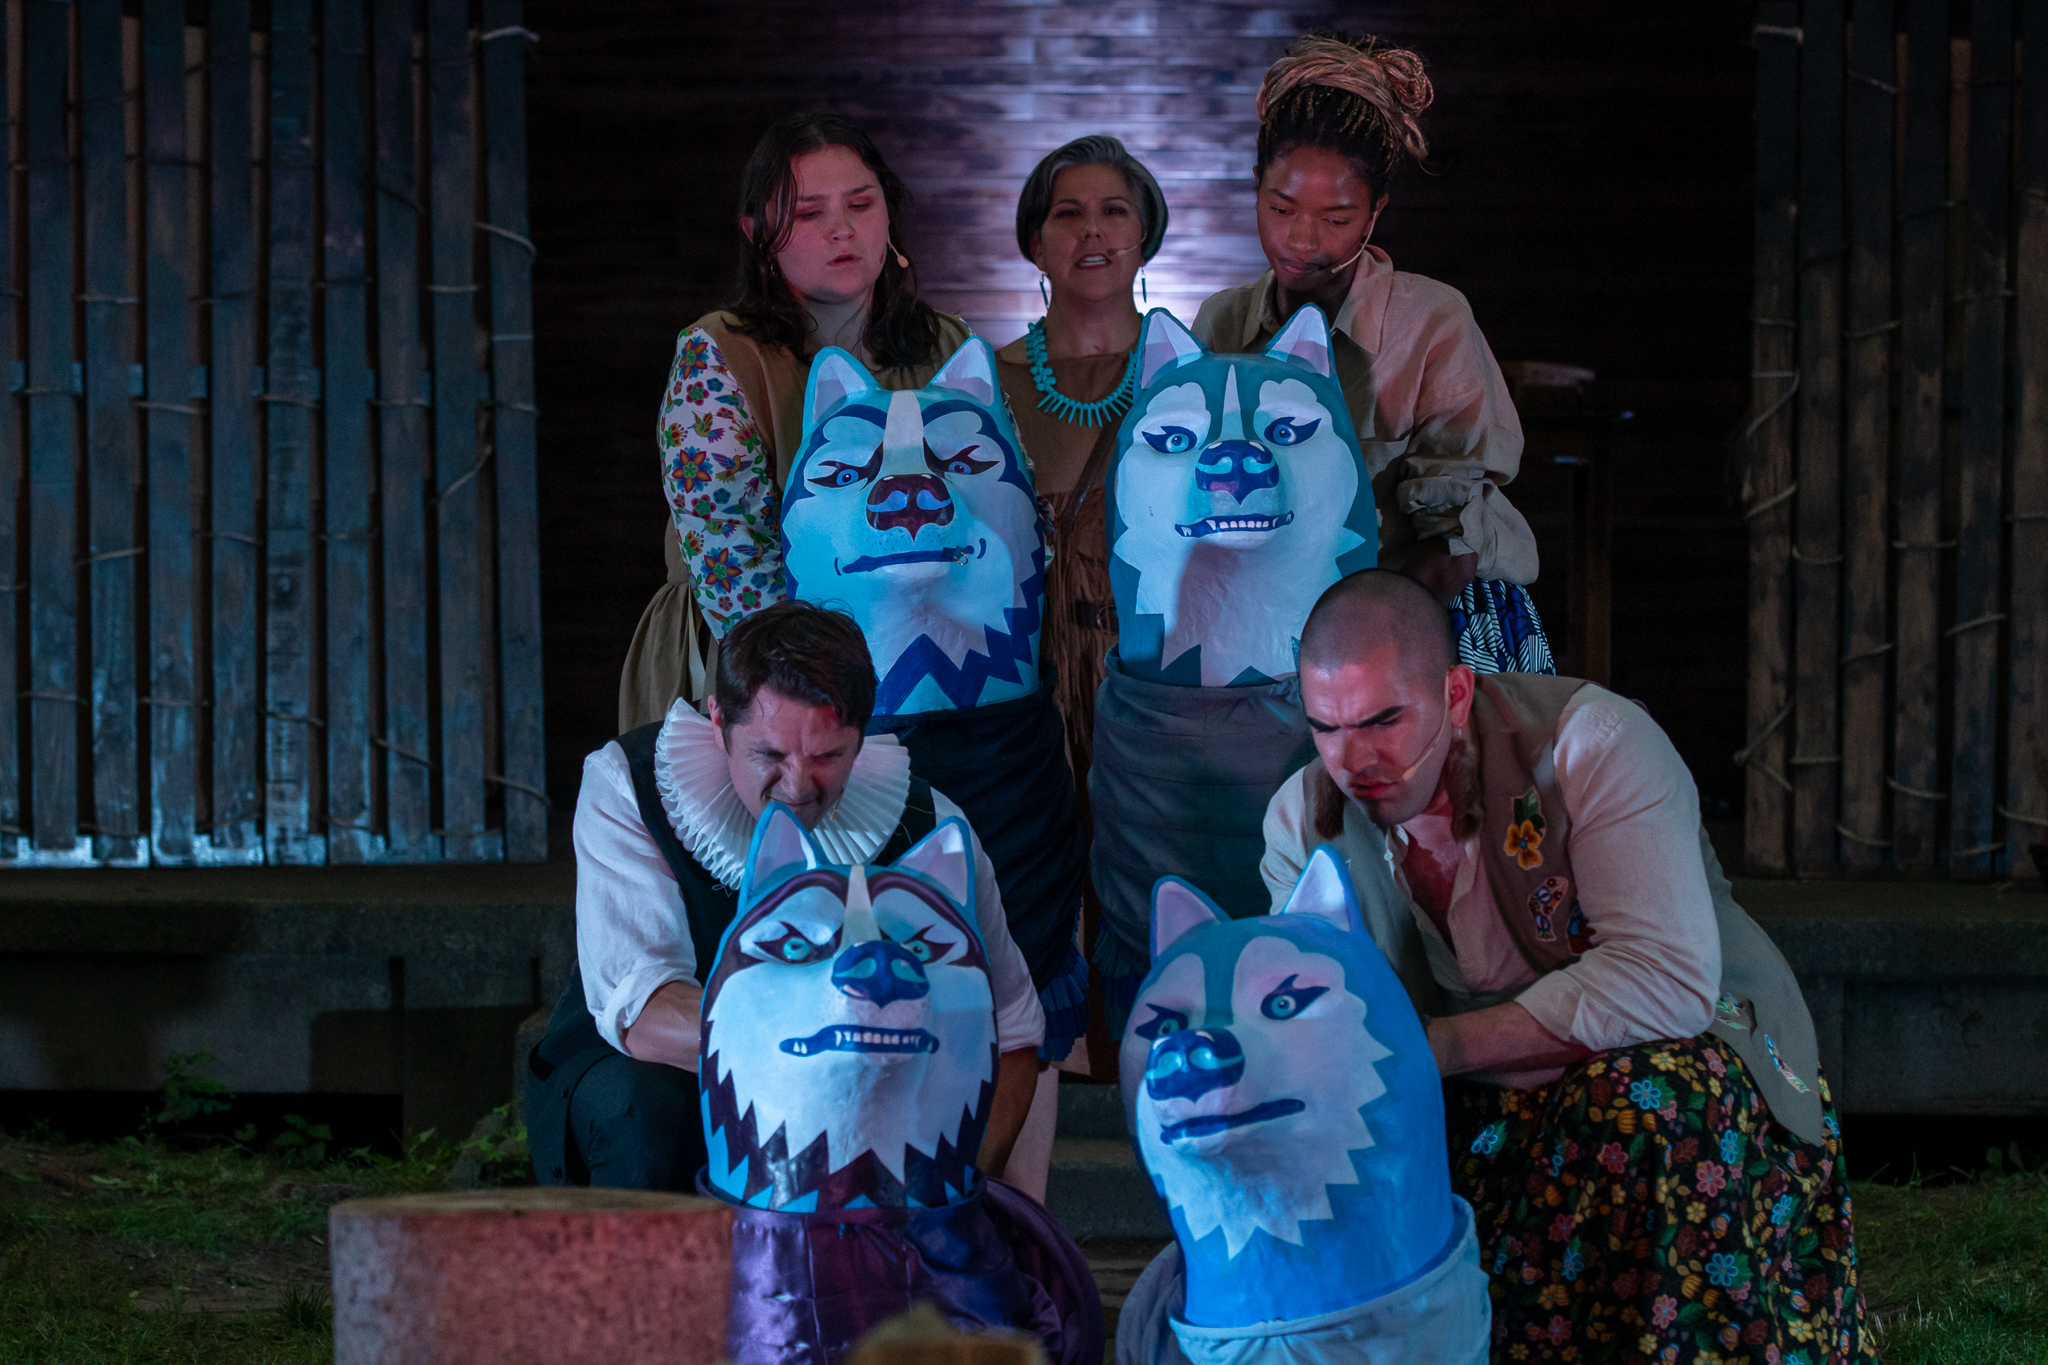 Otîhêw, portrayed by Nicole Joy-Fraser, stands with four actors, Brefny Caribou, Jewell Bowry, Jonathan LeRose, and Raymond Jordan Johnson-Brown, holding blue and white wolf puppets.